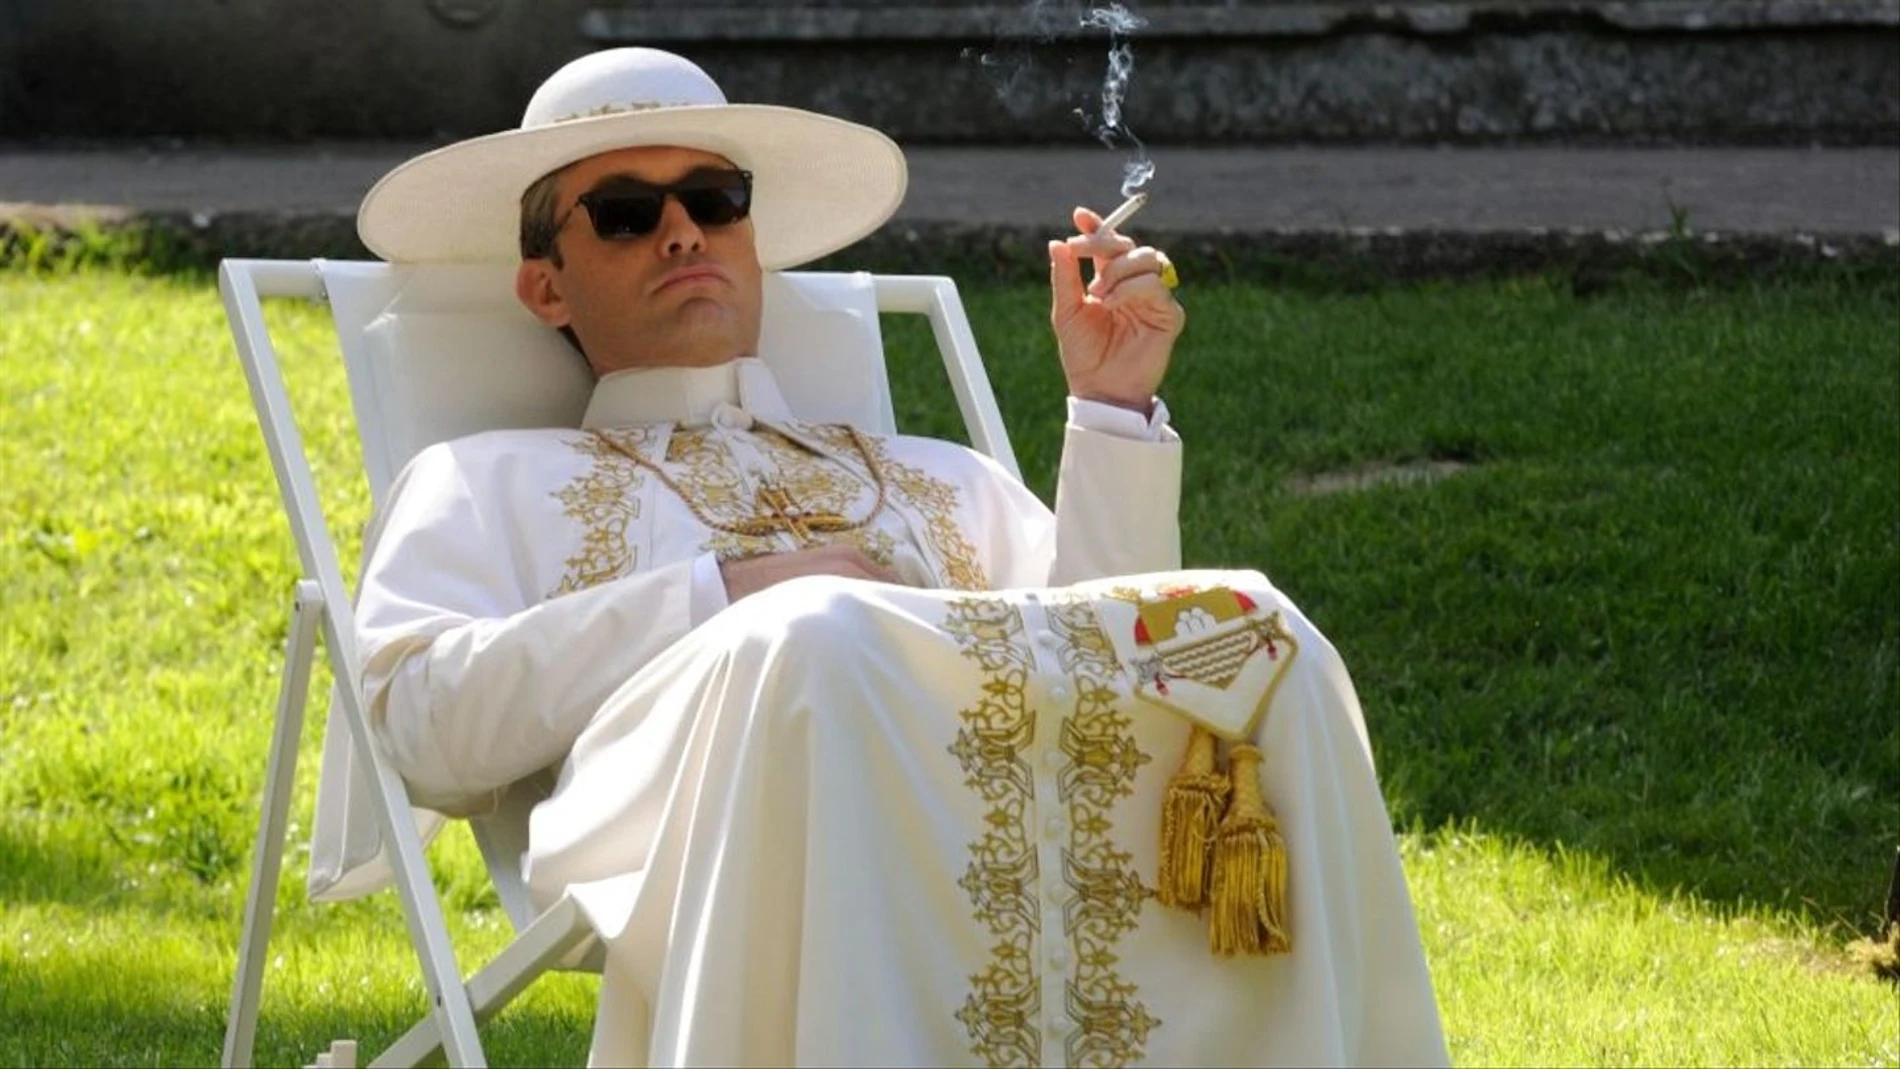 The young Pope